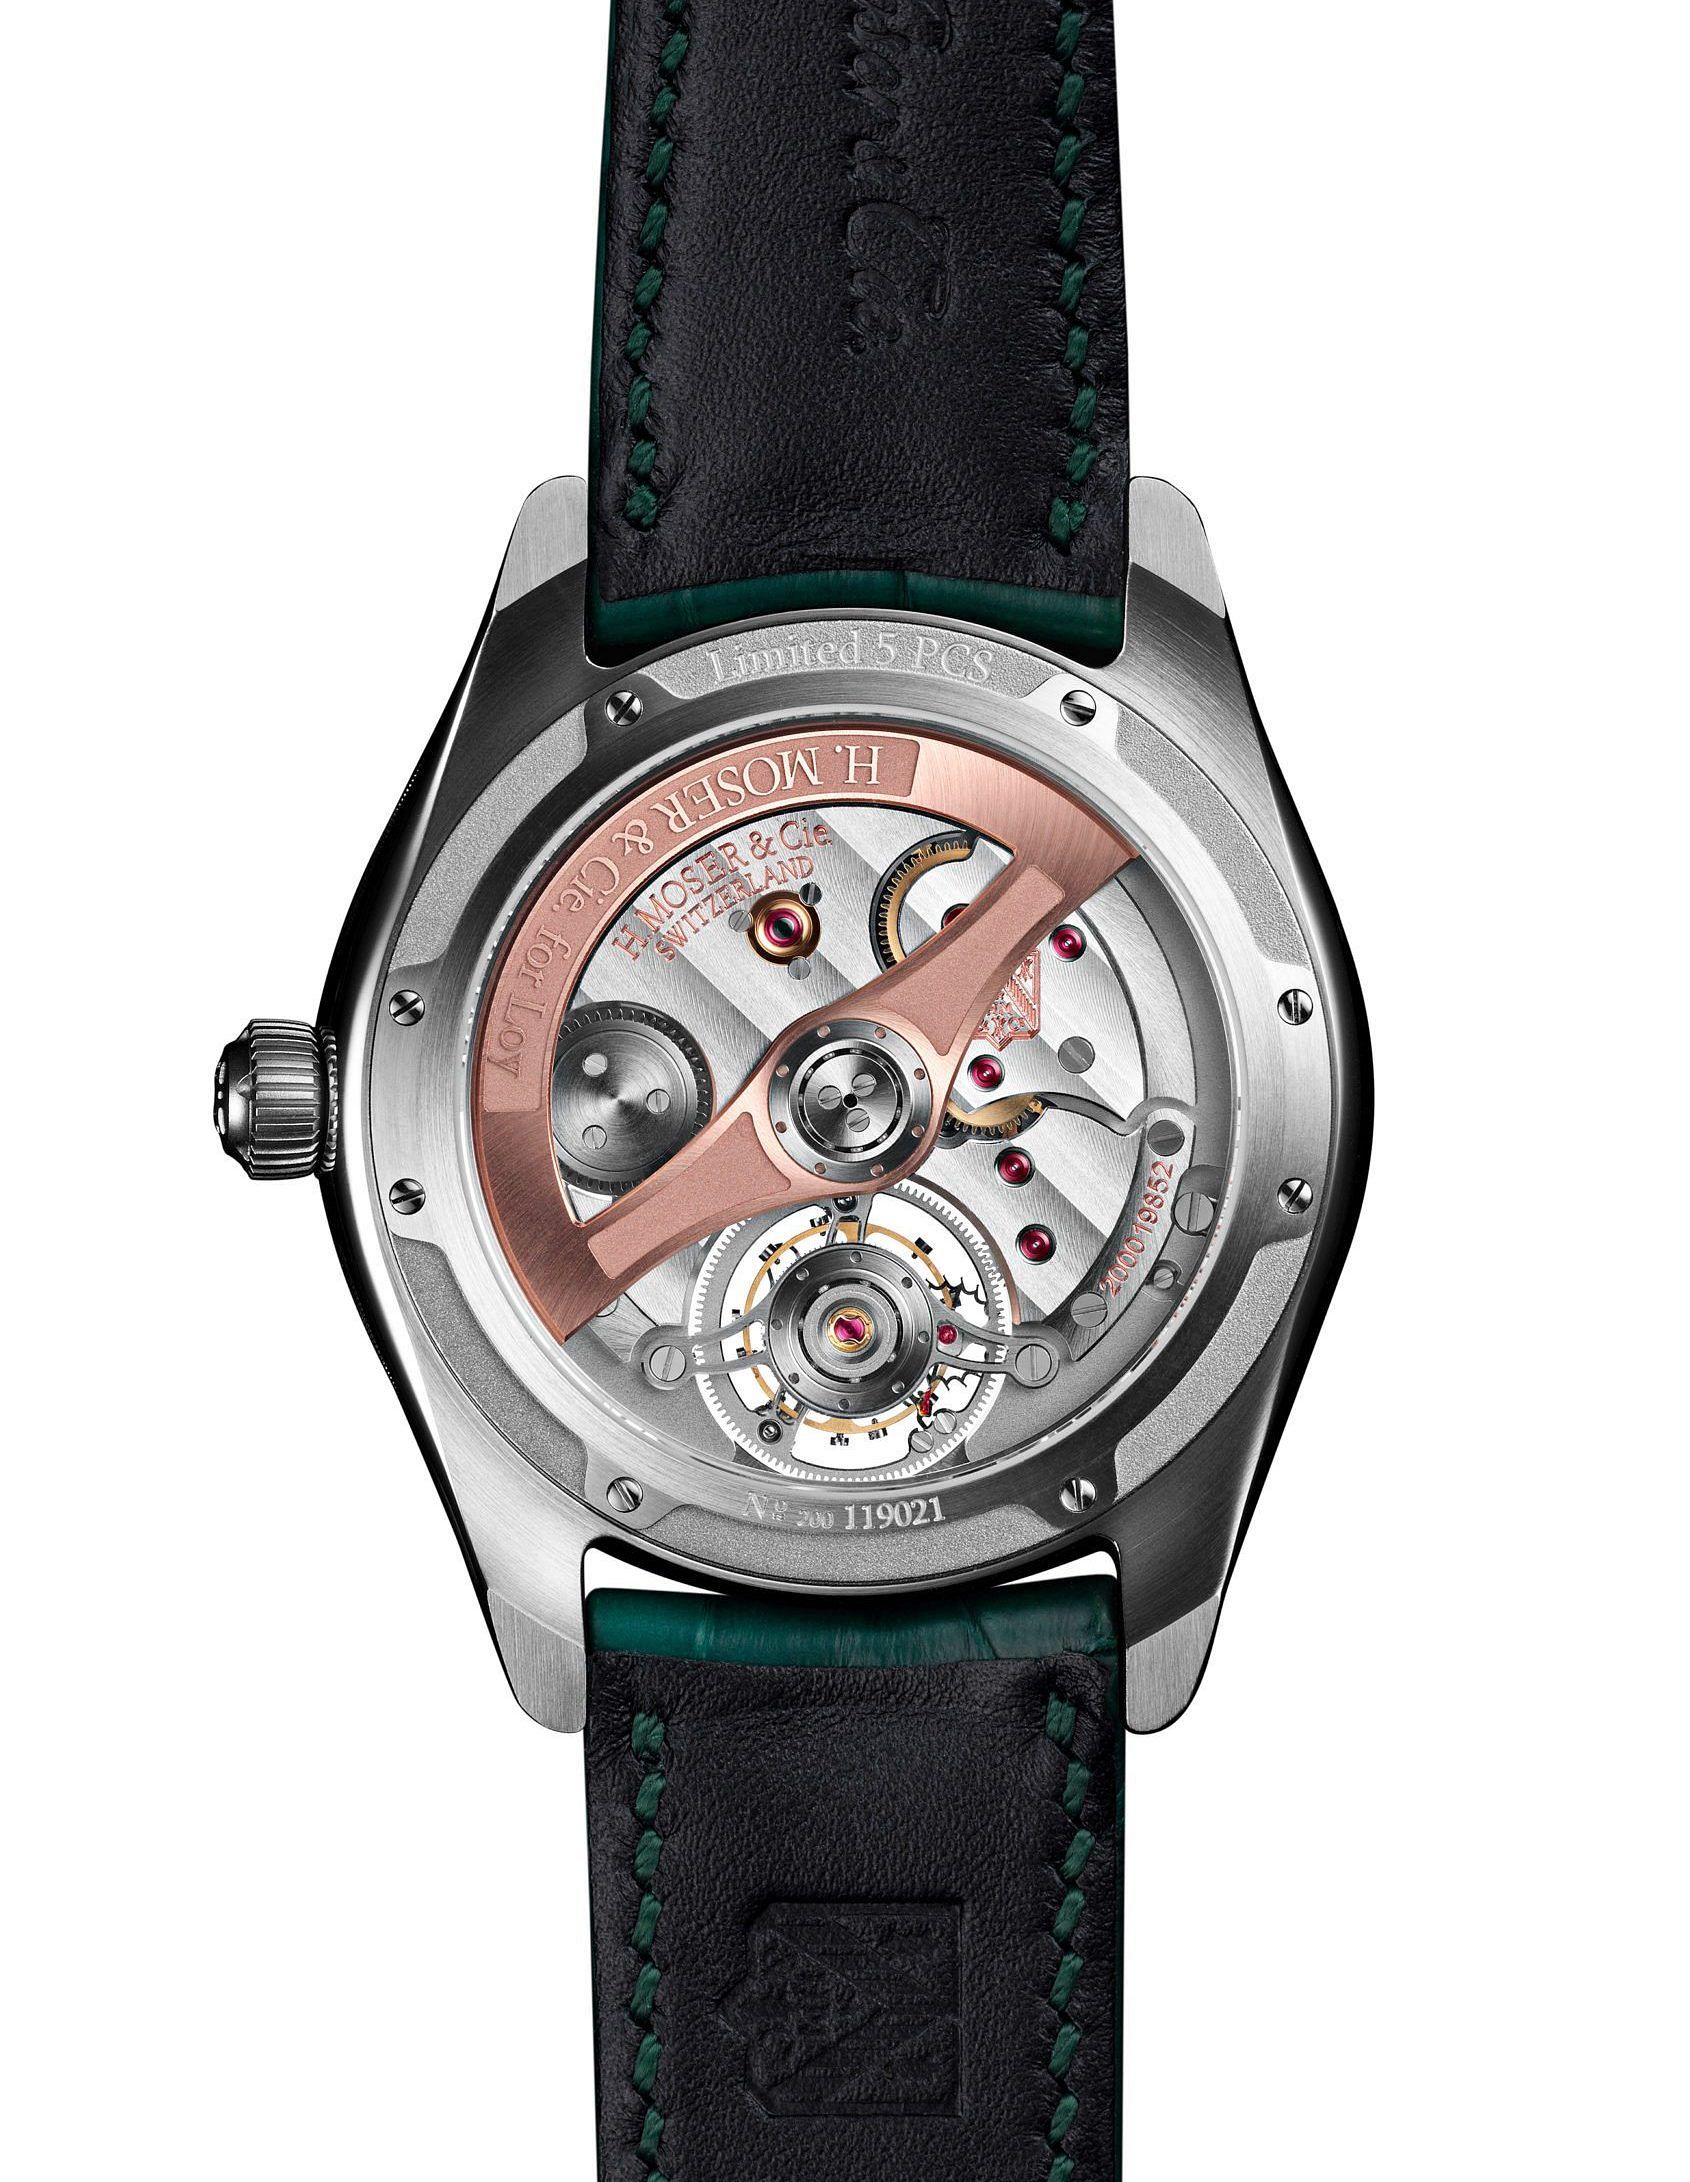 H. Moser & Cie. Cure ALS Pioneer